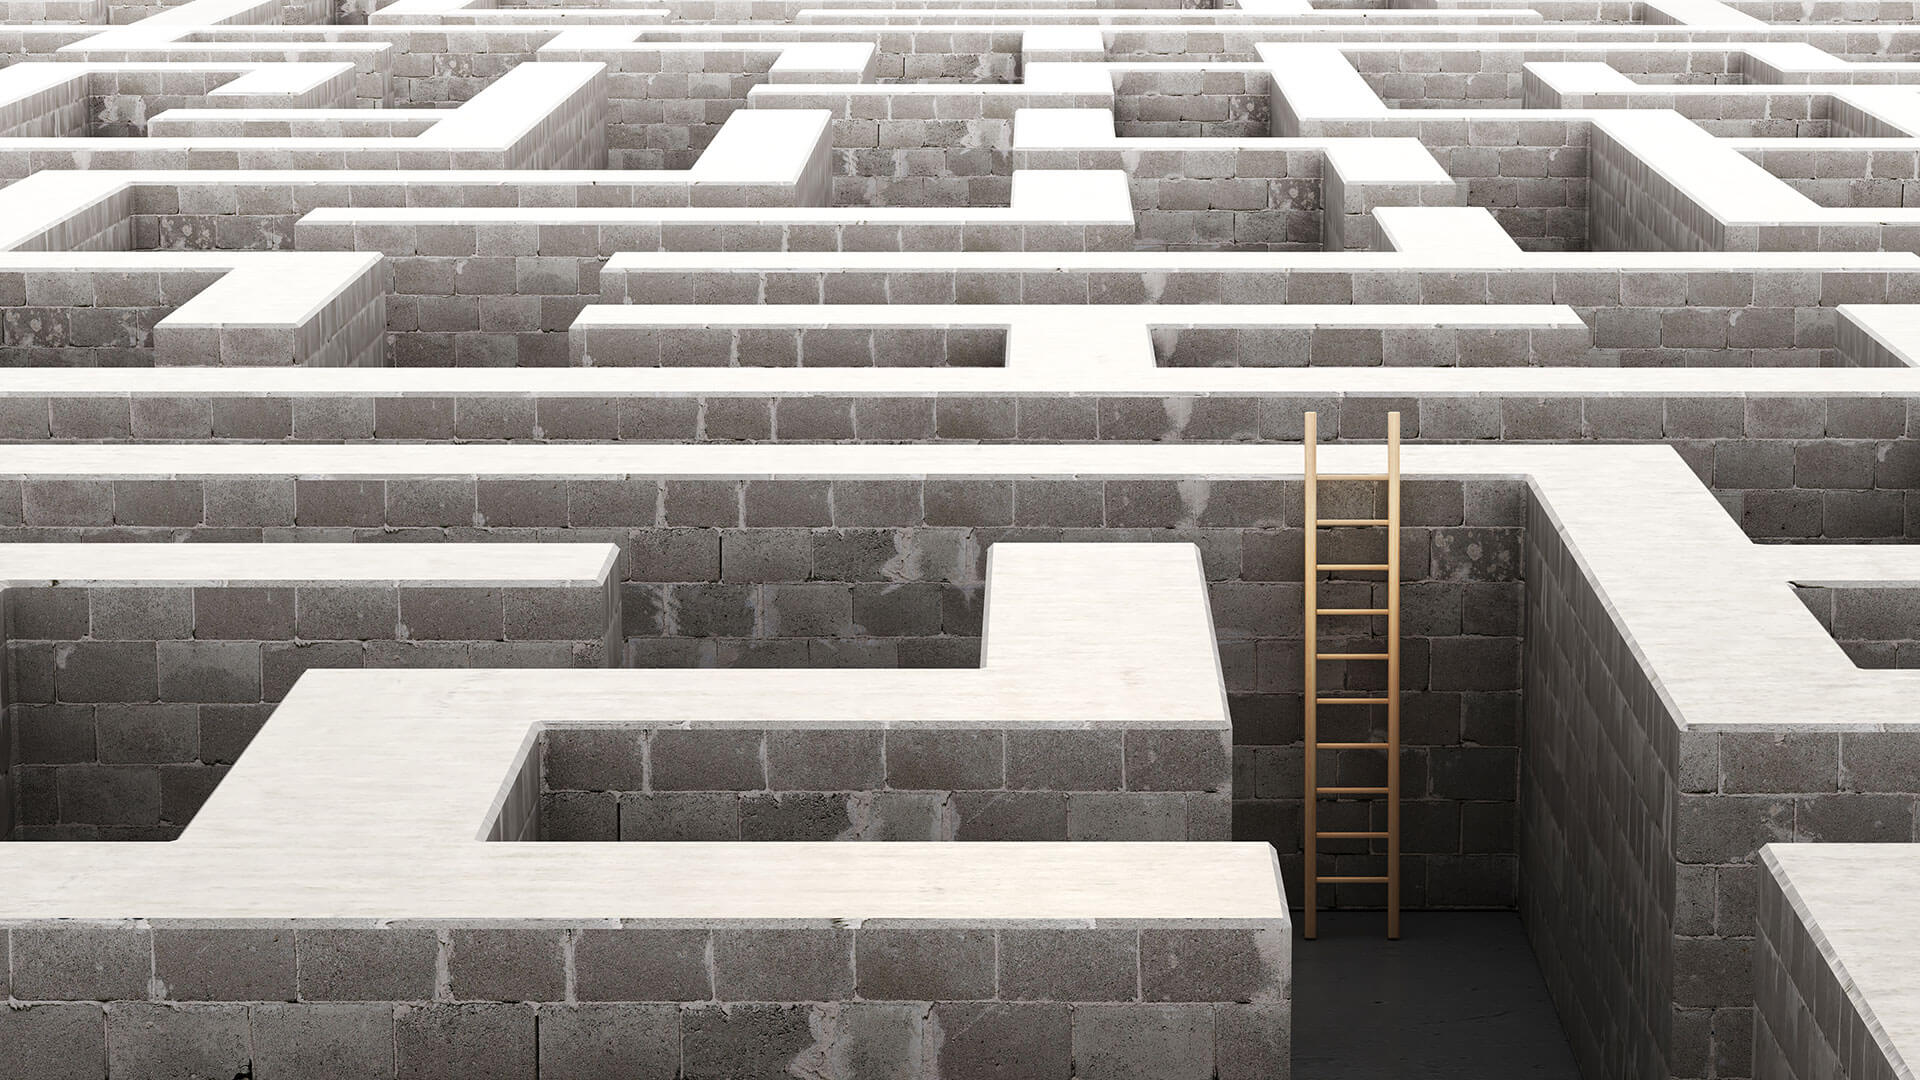 A ladder sticks up out of a three dimensional maze indicating an end to the navigating ECEI